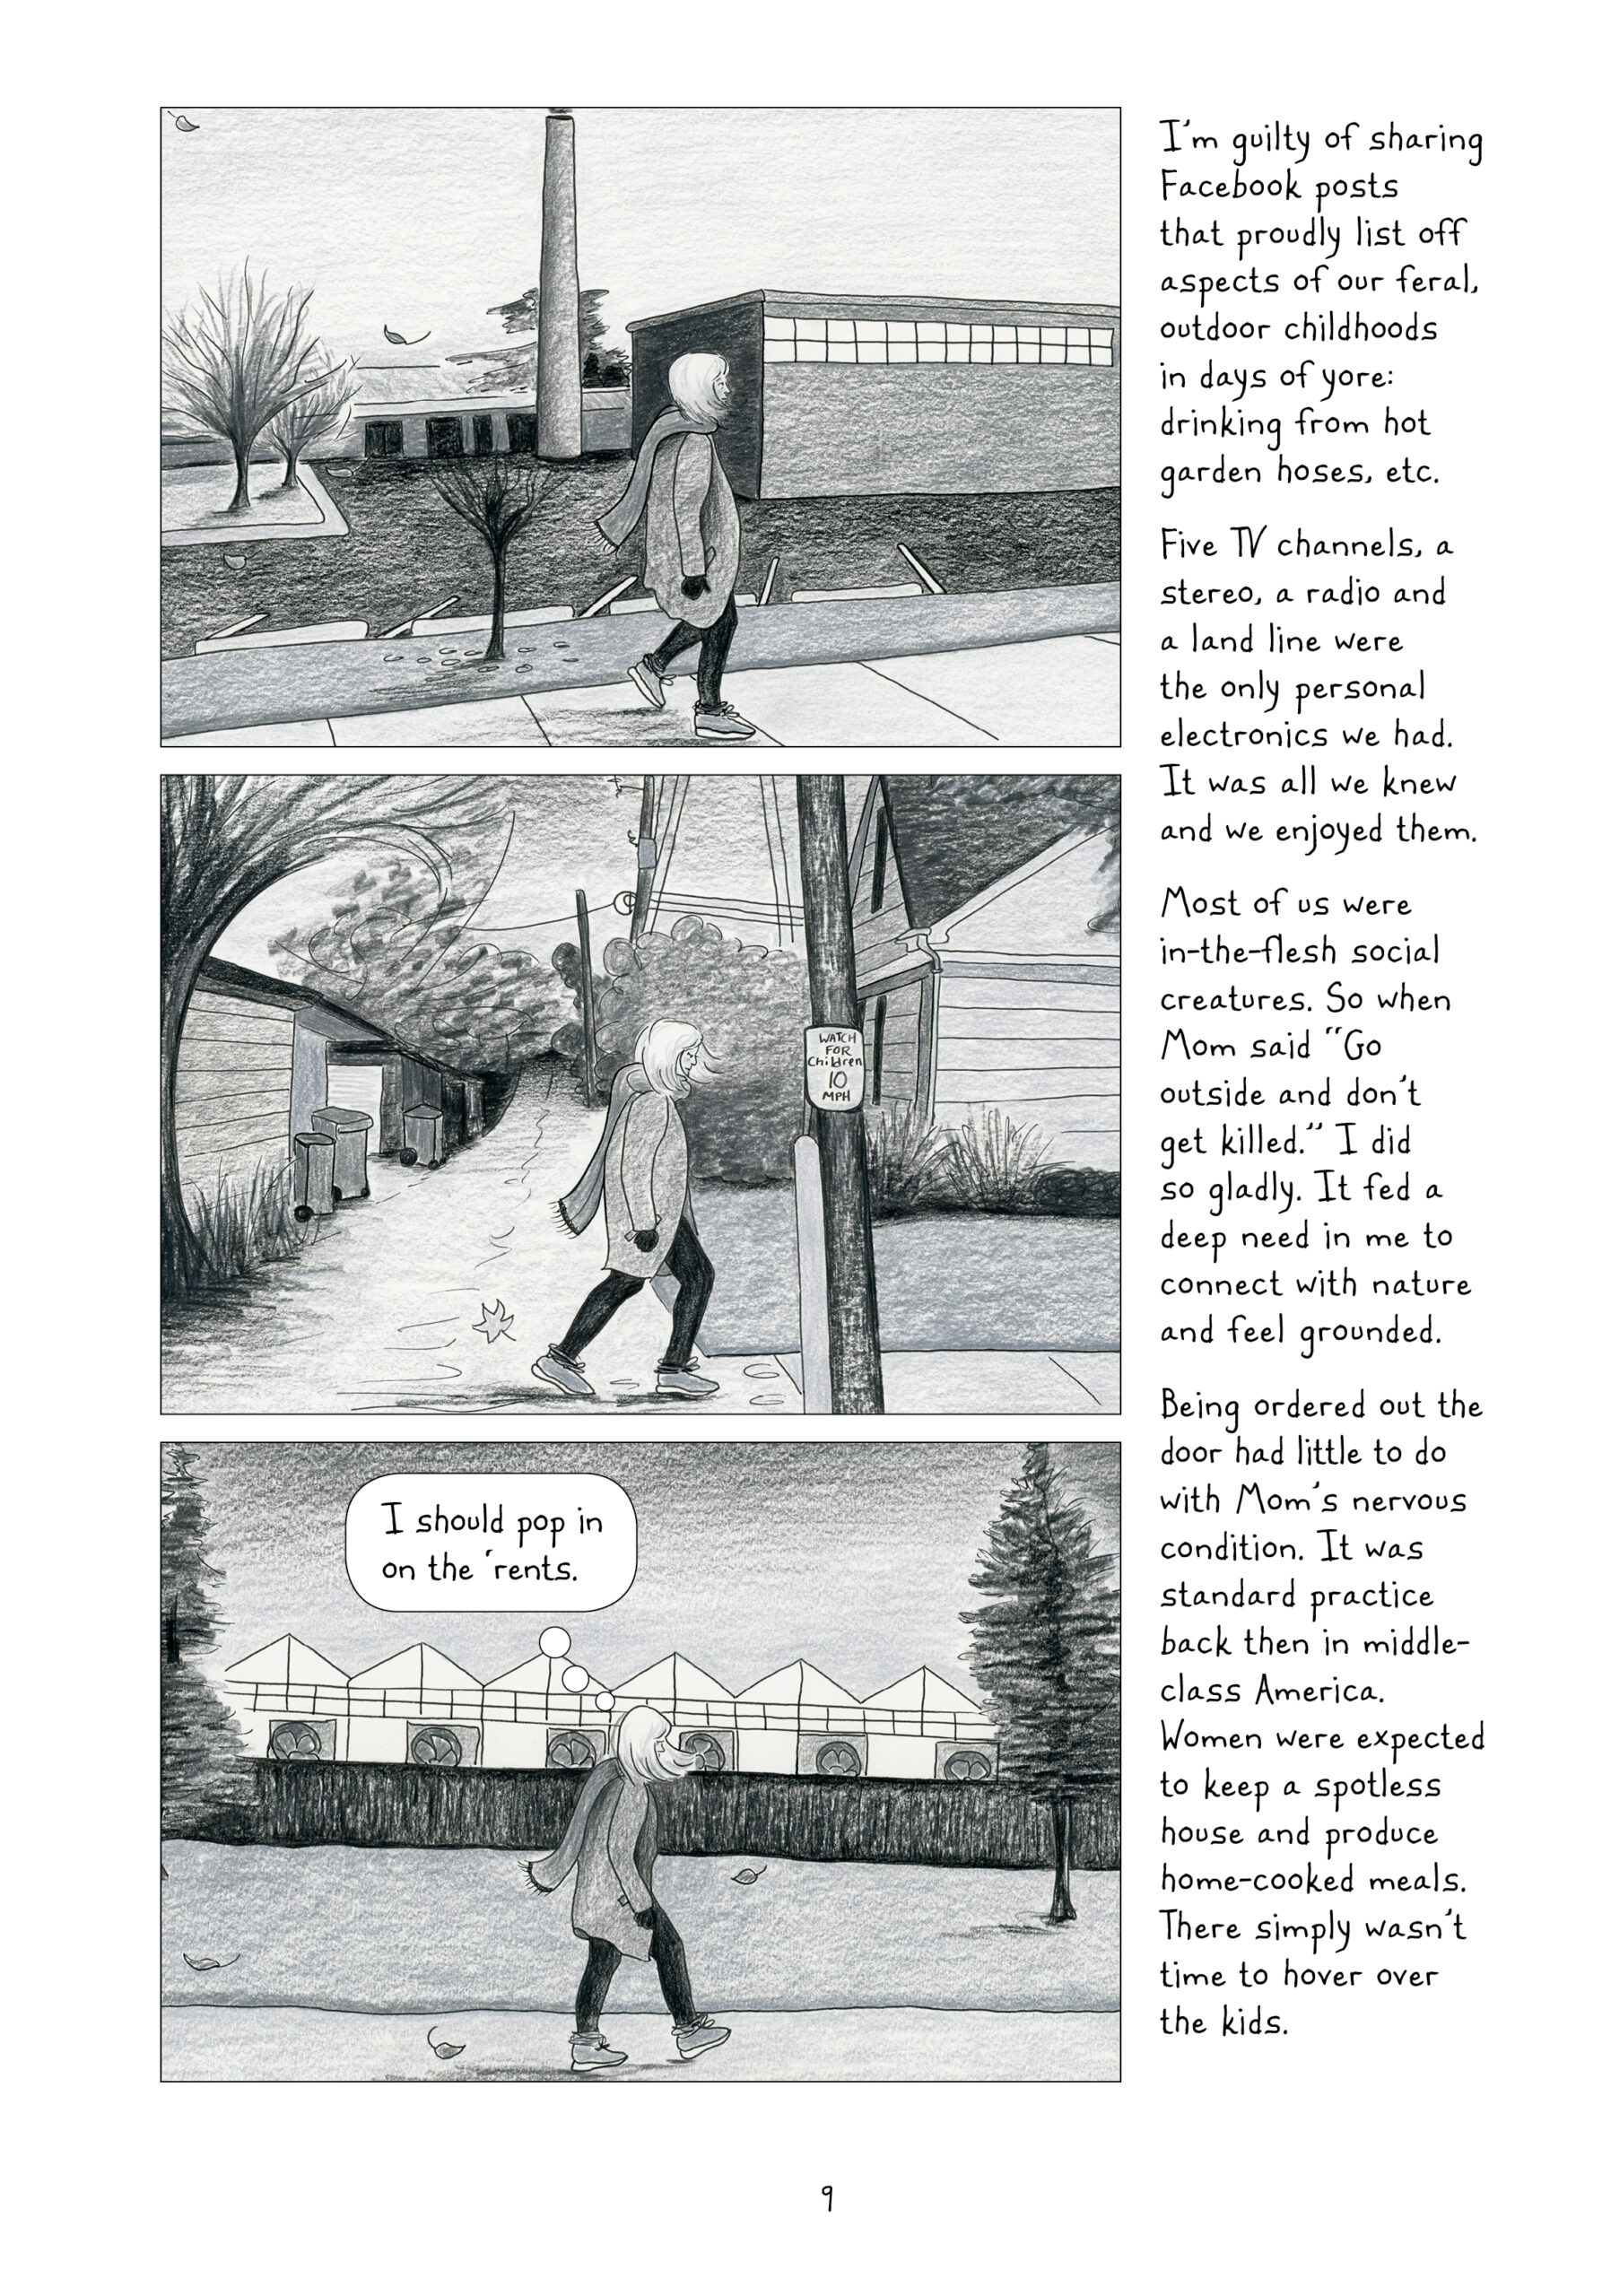 3 black and white panels of Lynn walking. The outdoor scene changes in each as she wanders her neighborhood. She reminisces on her generation's "feral, outdoor childhoods in days of yore." 